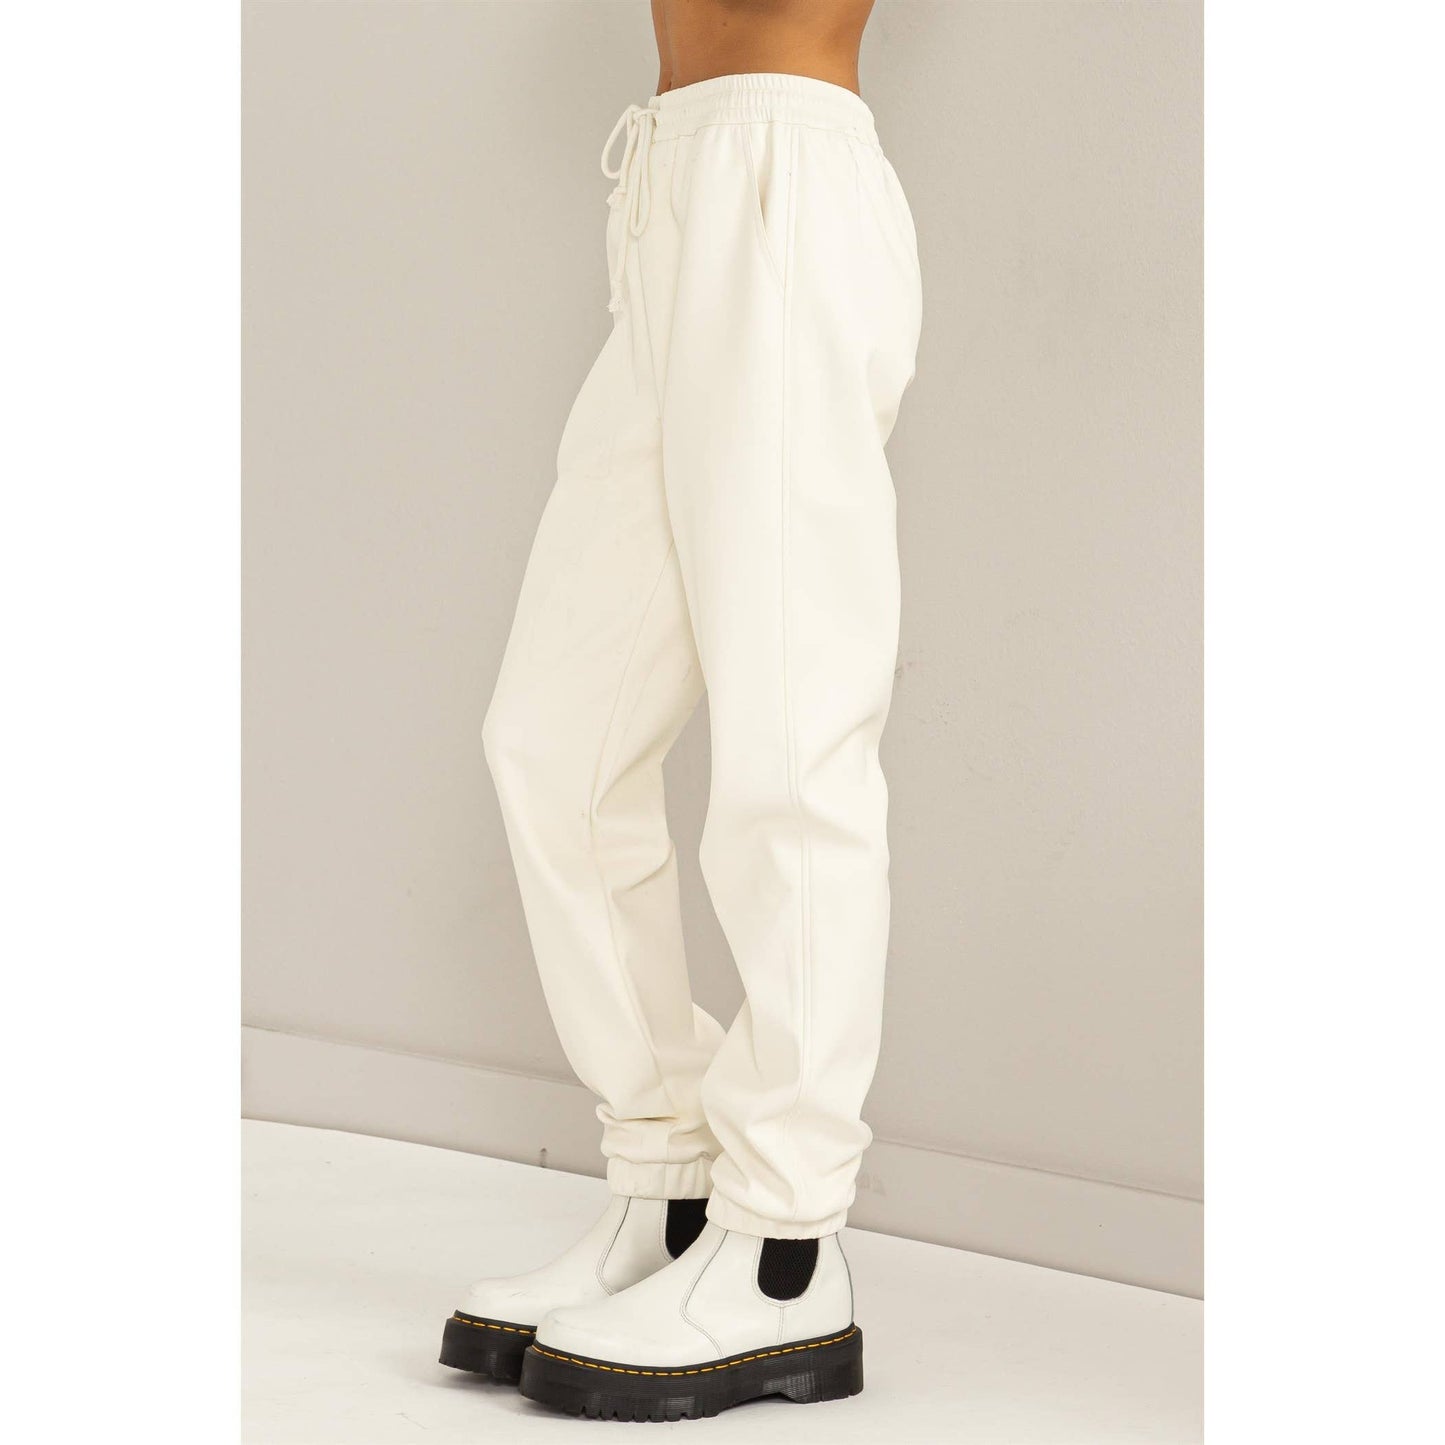 LEATHER DRAWSTRING HIGH-WAISTED JOGGER PANTS: BLACK / S